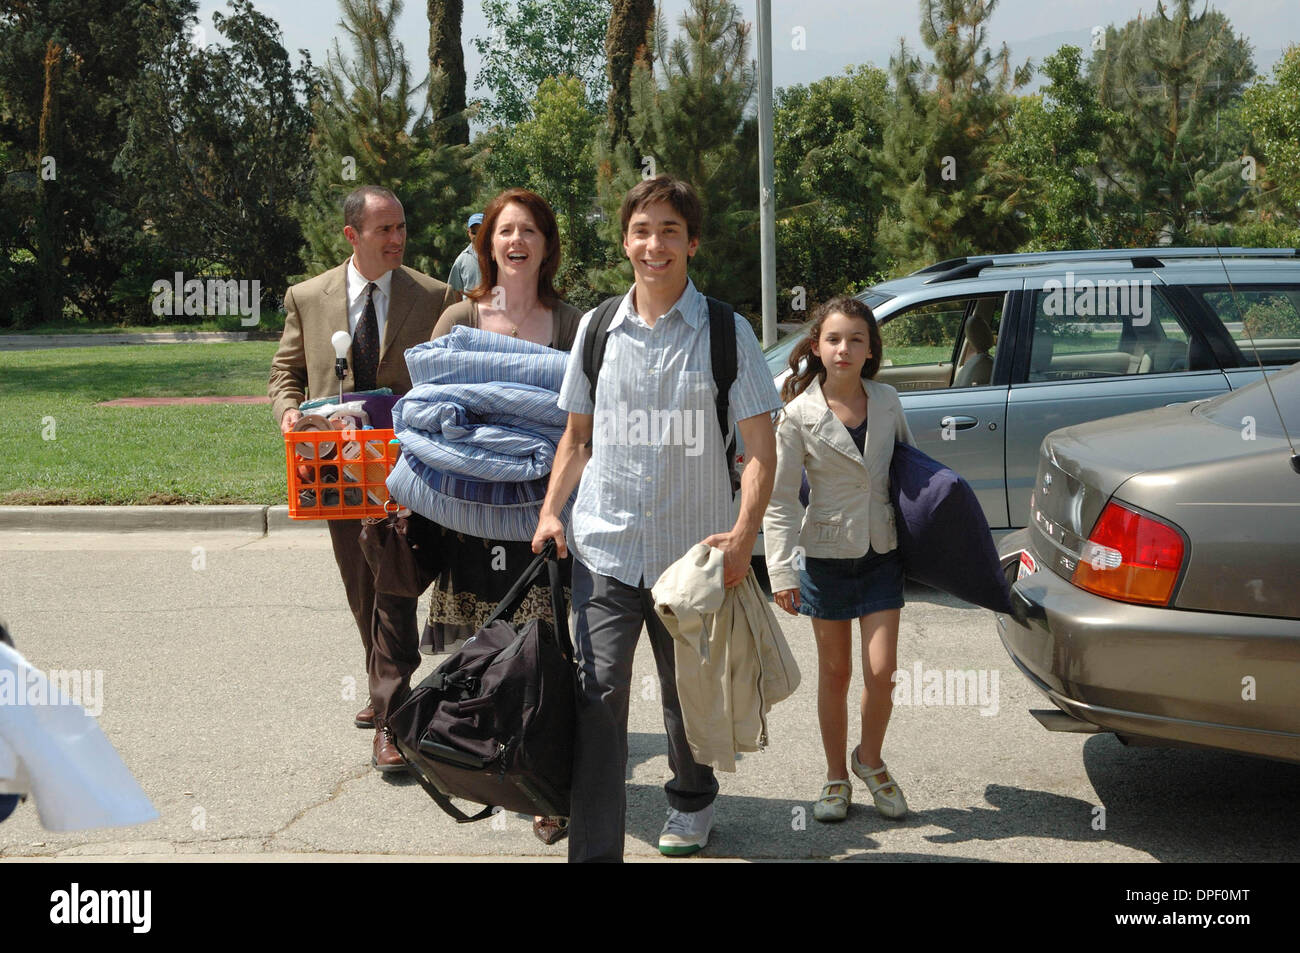 Jul. 06, 2006 - K49443ES.''ACCEPTED''.TV-FILM STILL. L to R) Jack Gaines  (MARK DERWIN), Ann Gaines (ANN CUSACK), son Bartleby (JUSTIN LONG) and  daughter Lizzie (HANNAH MARKS) cart Bartleby off to Ã'collegeÃ“ in